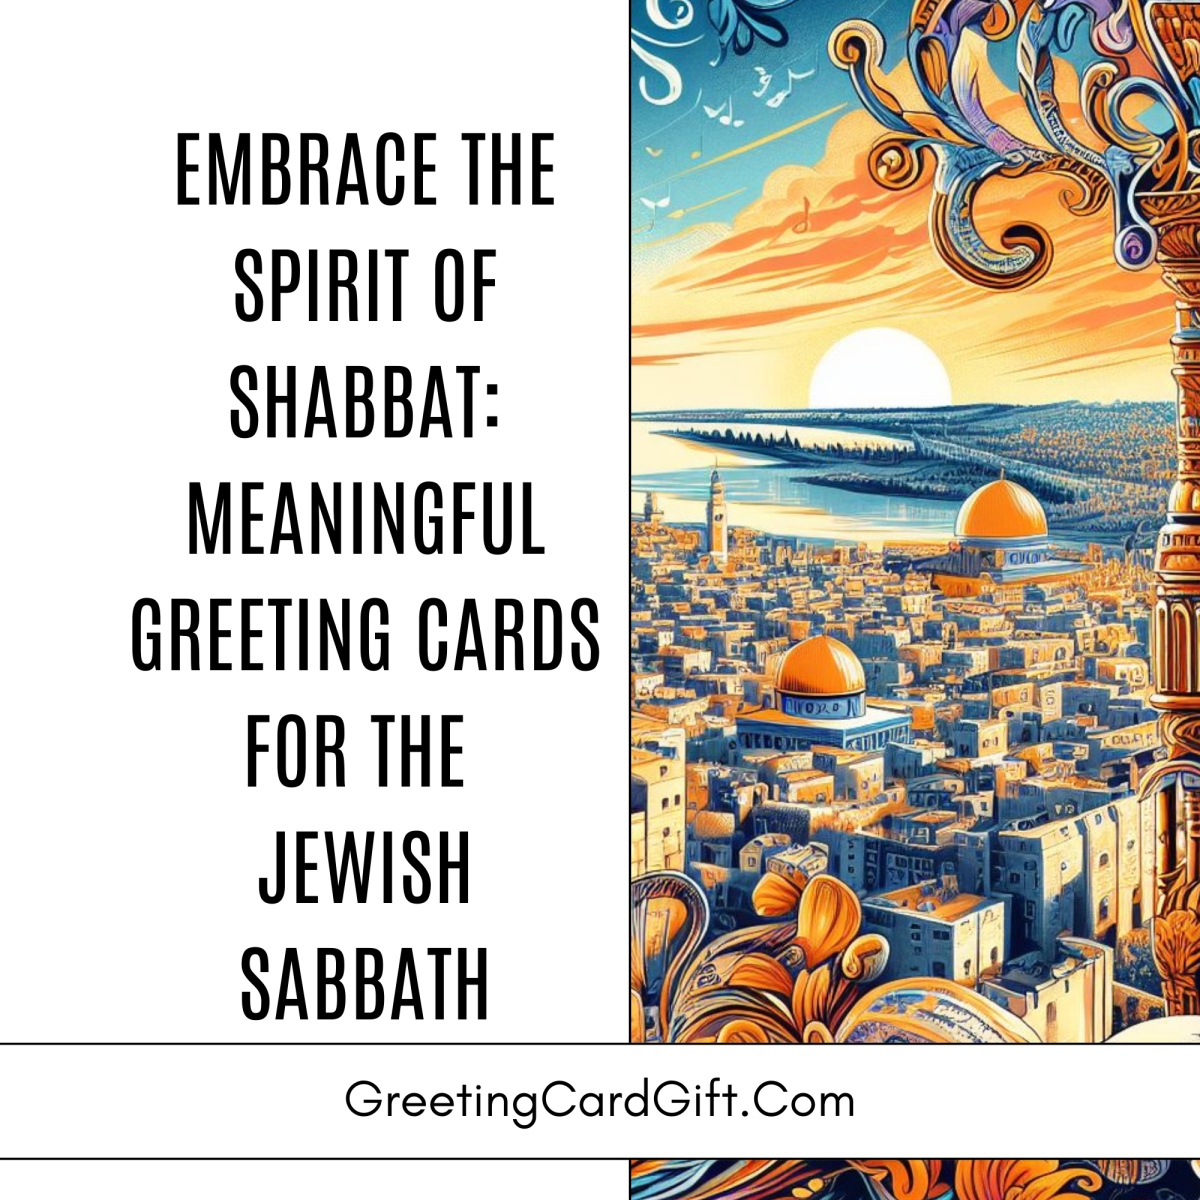 Embrace The Spirit Of Shabbat: Meaningful Greeting Cards For The Jewish Sabbath